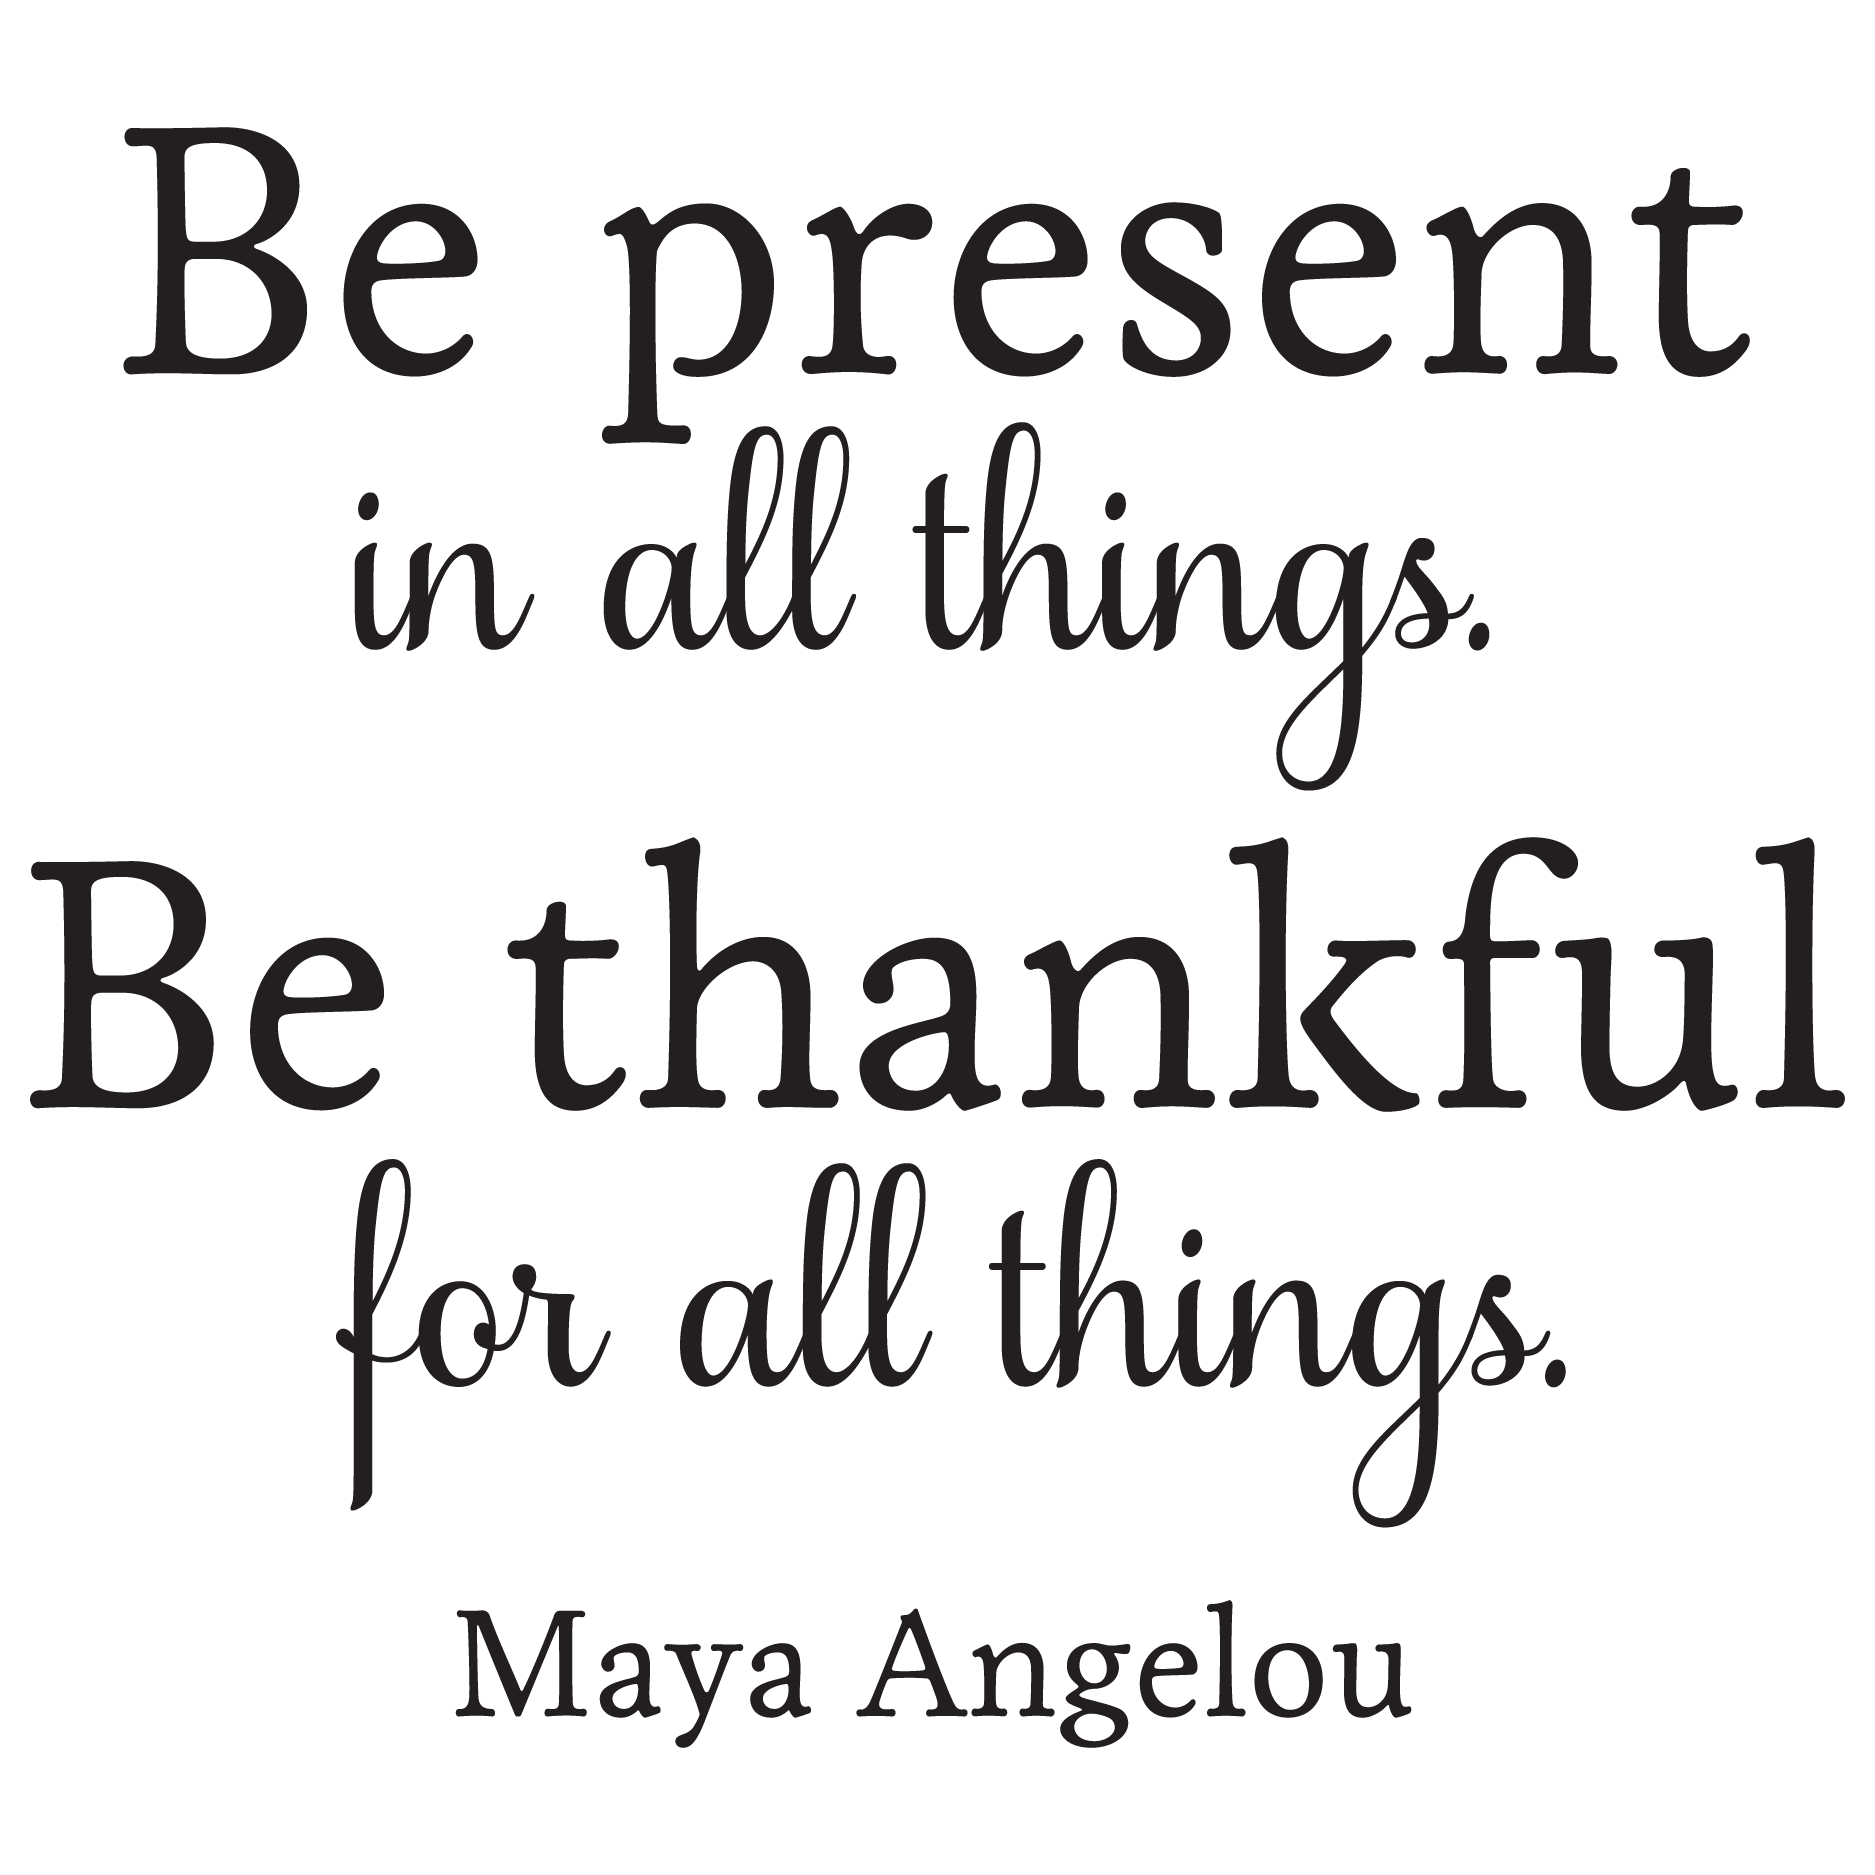 Be present in all things. Be thankful for all things. Maya Angelou